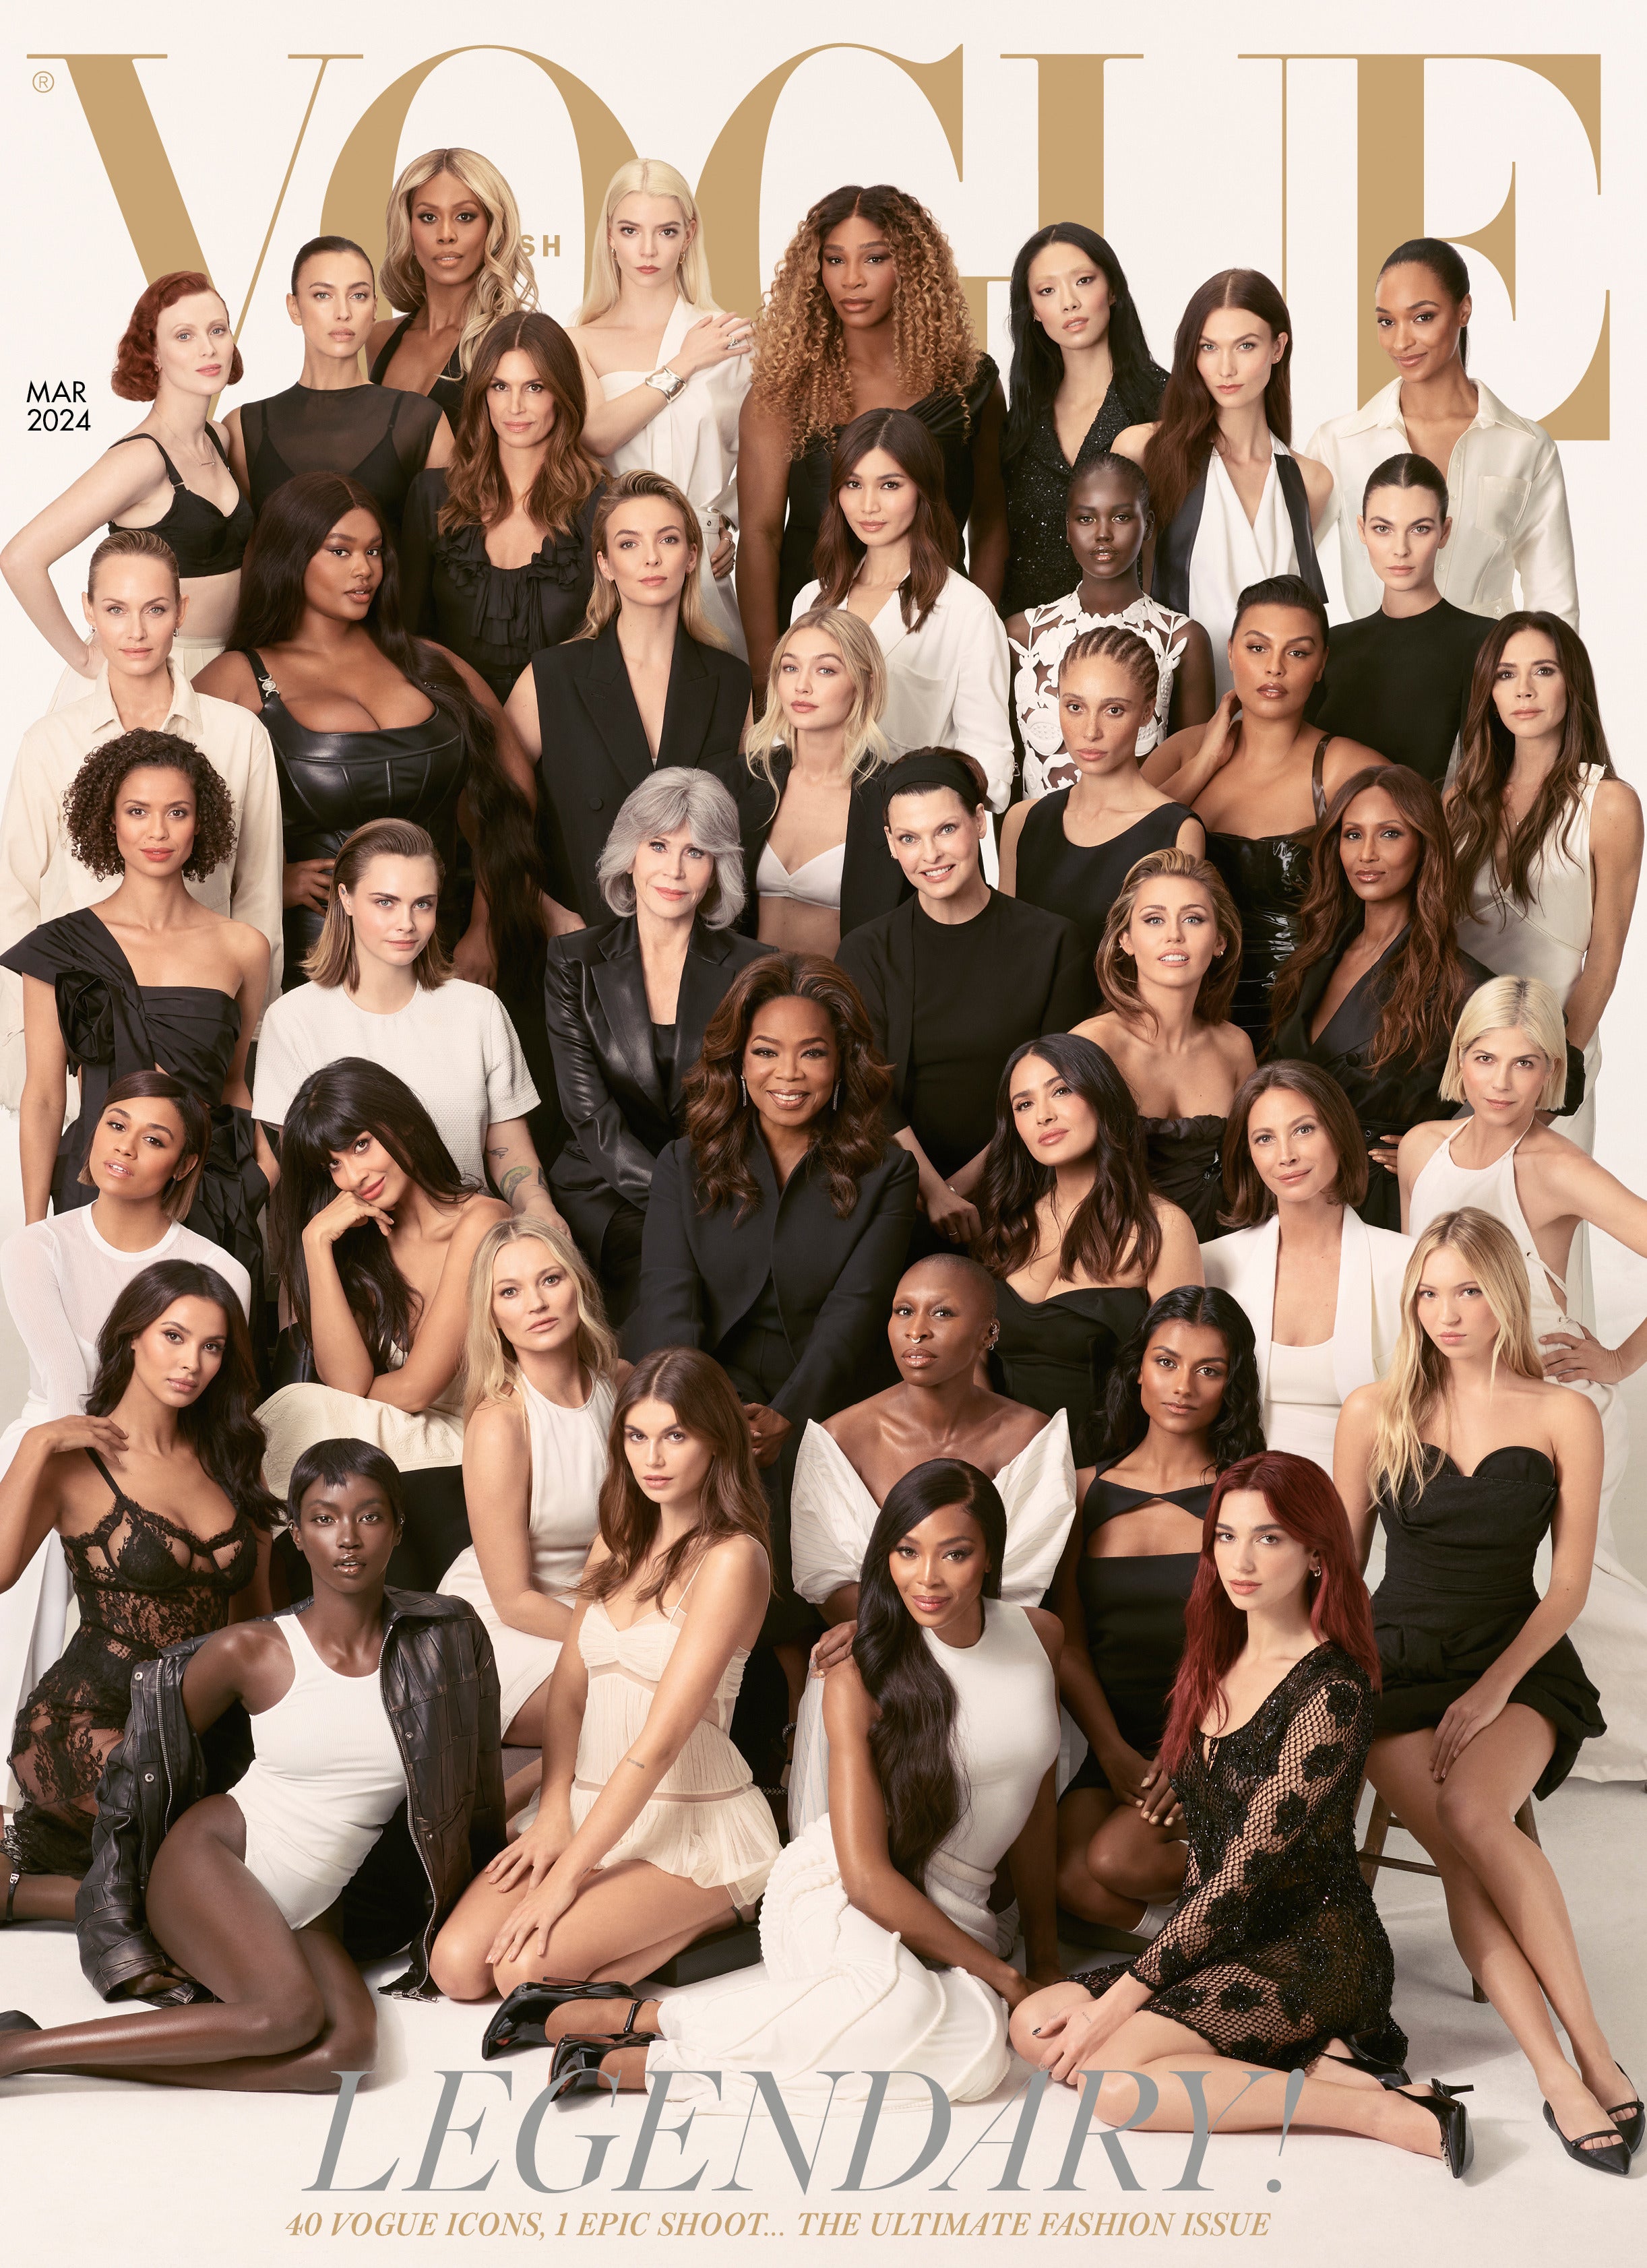 Legends Only: Cindy Crawford, Jodie Comer and Cynthia Erivo among the 40 women featured in Enninful’s last cover